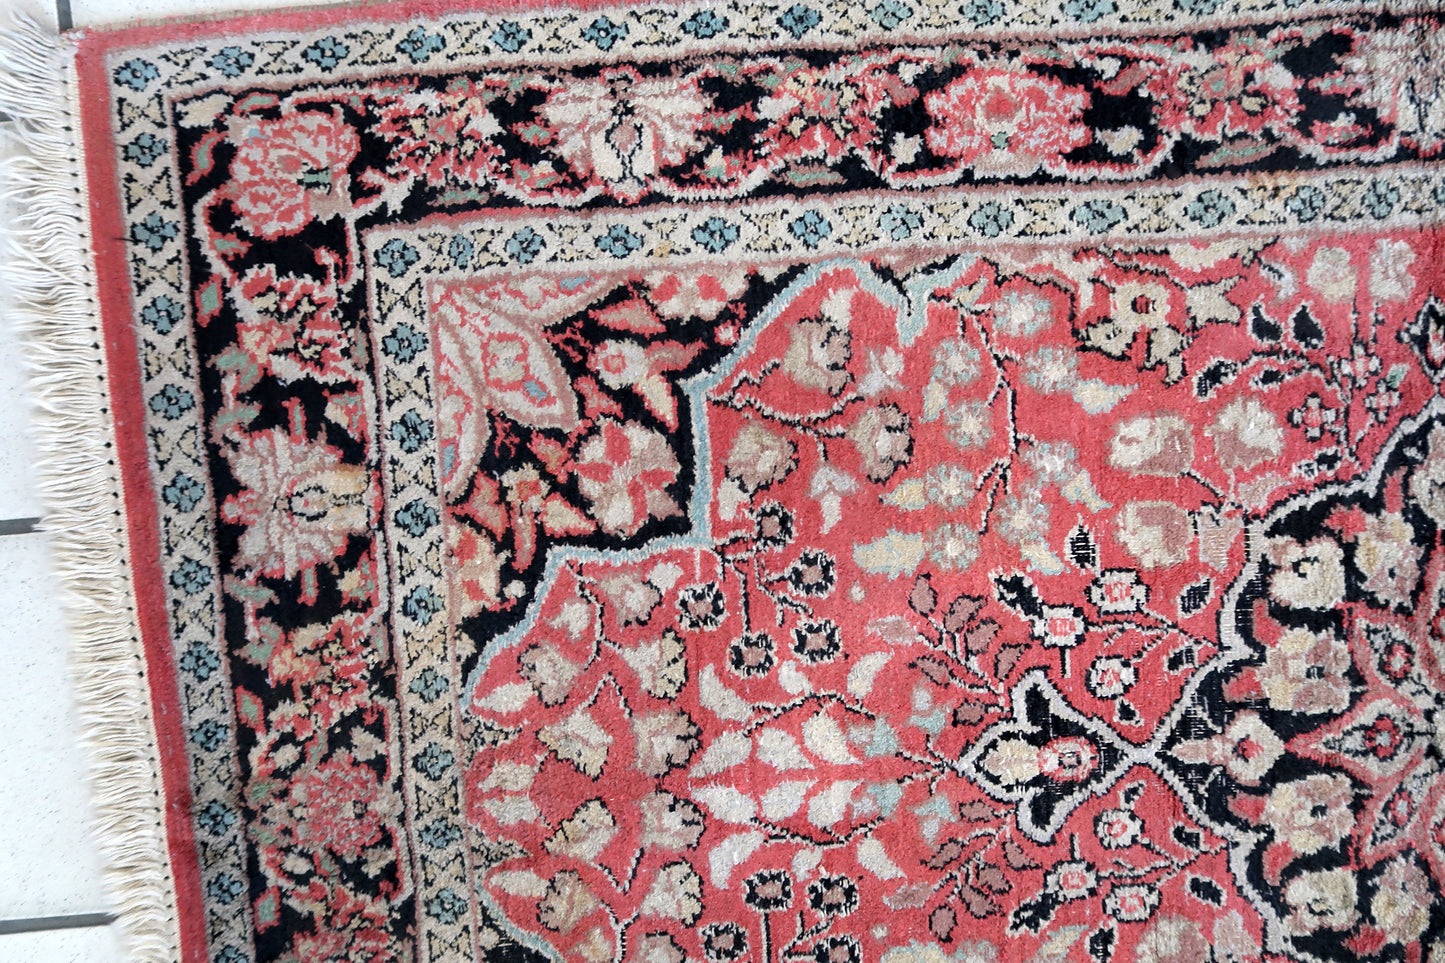 Handmade vintage Persian Tabriz rug made in Kashmir wool. The rug is from the end of 20th century in original good condition. The rug is in traditional medallion design in pink and black colors. Like many recent Tabrizes, this example shows floral figures drawn in a manner suggestive of Safavid art.